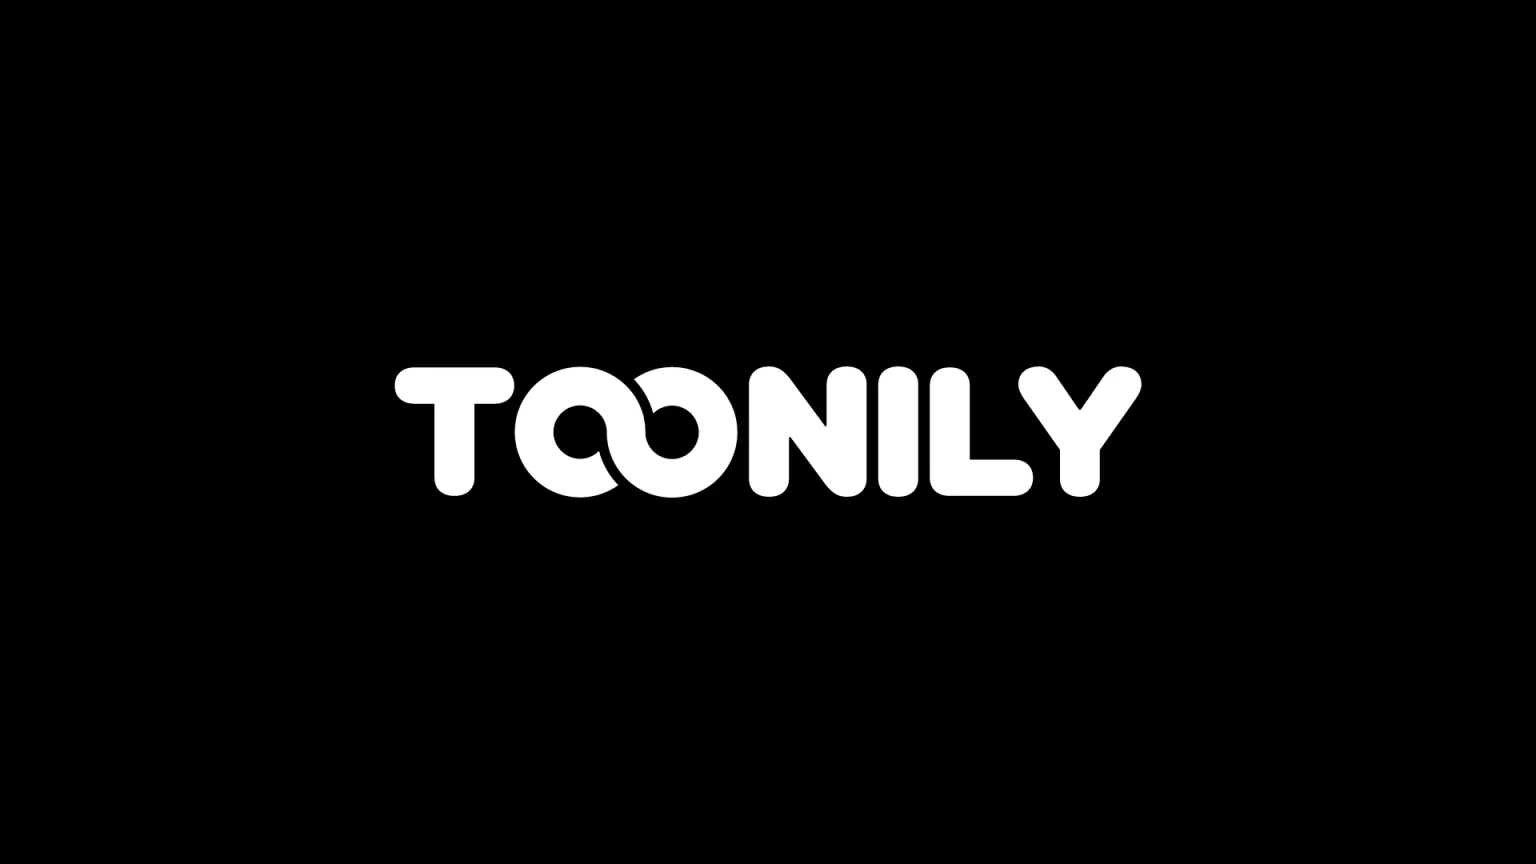 990980 3 1536x864 - Toonily Mod Apk V8.0 (All Chapters Unlocked) Latest Version